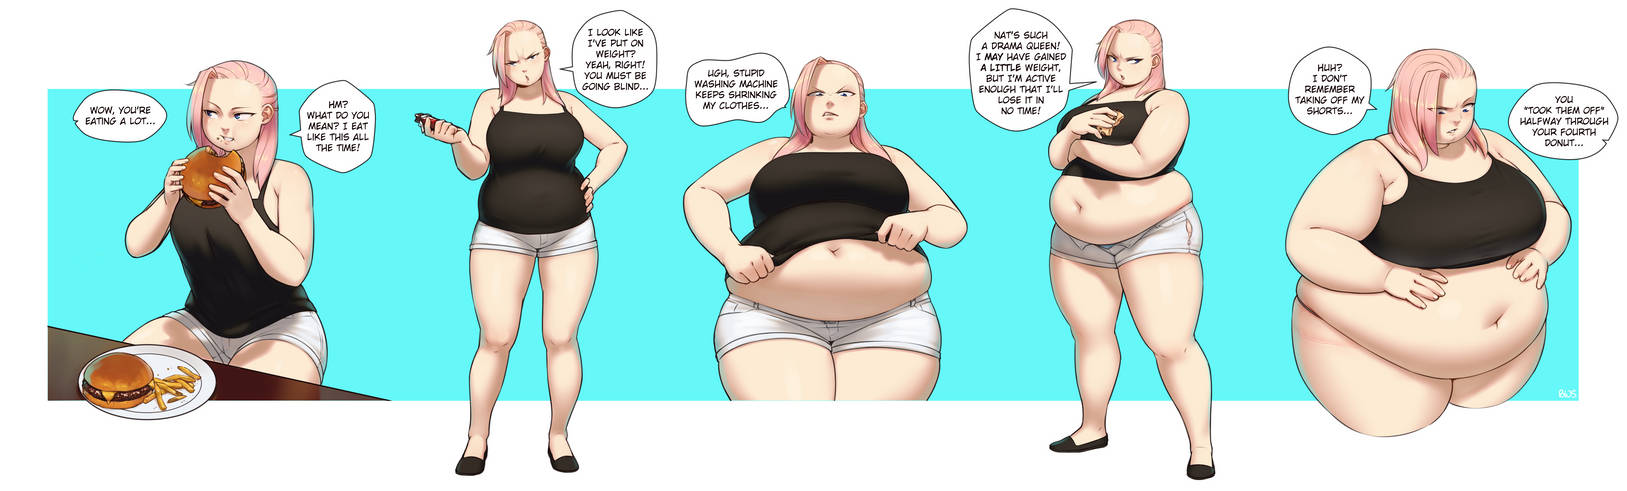 Denial Continues to Weigh on You by Better-with-Salt on DeviantArt.